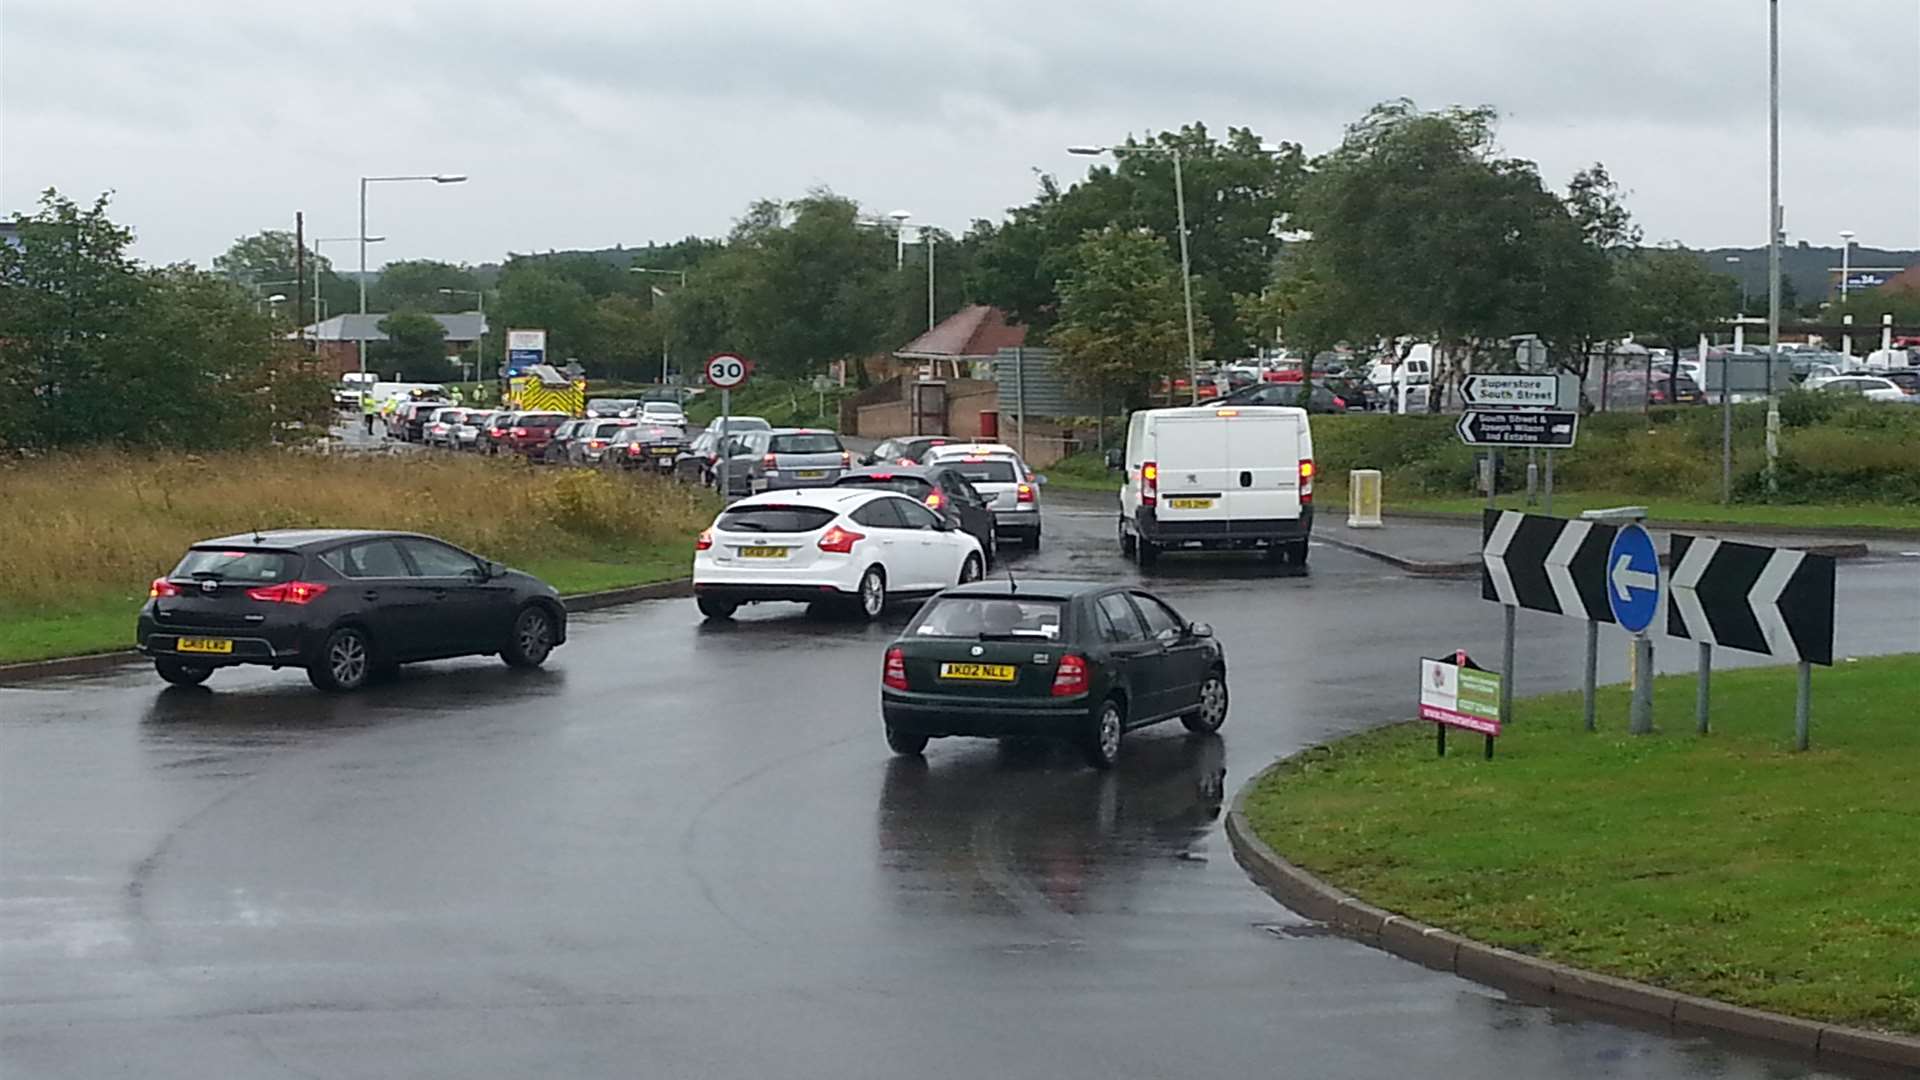 Queues are building around Whitstable Tesco